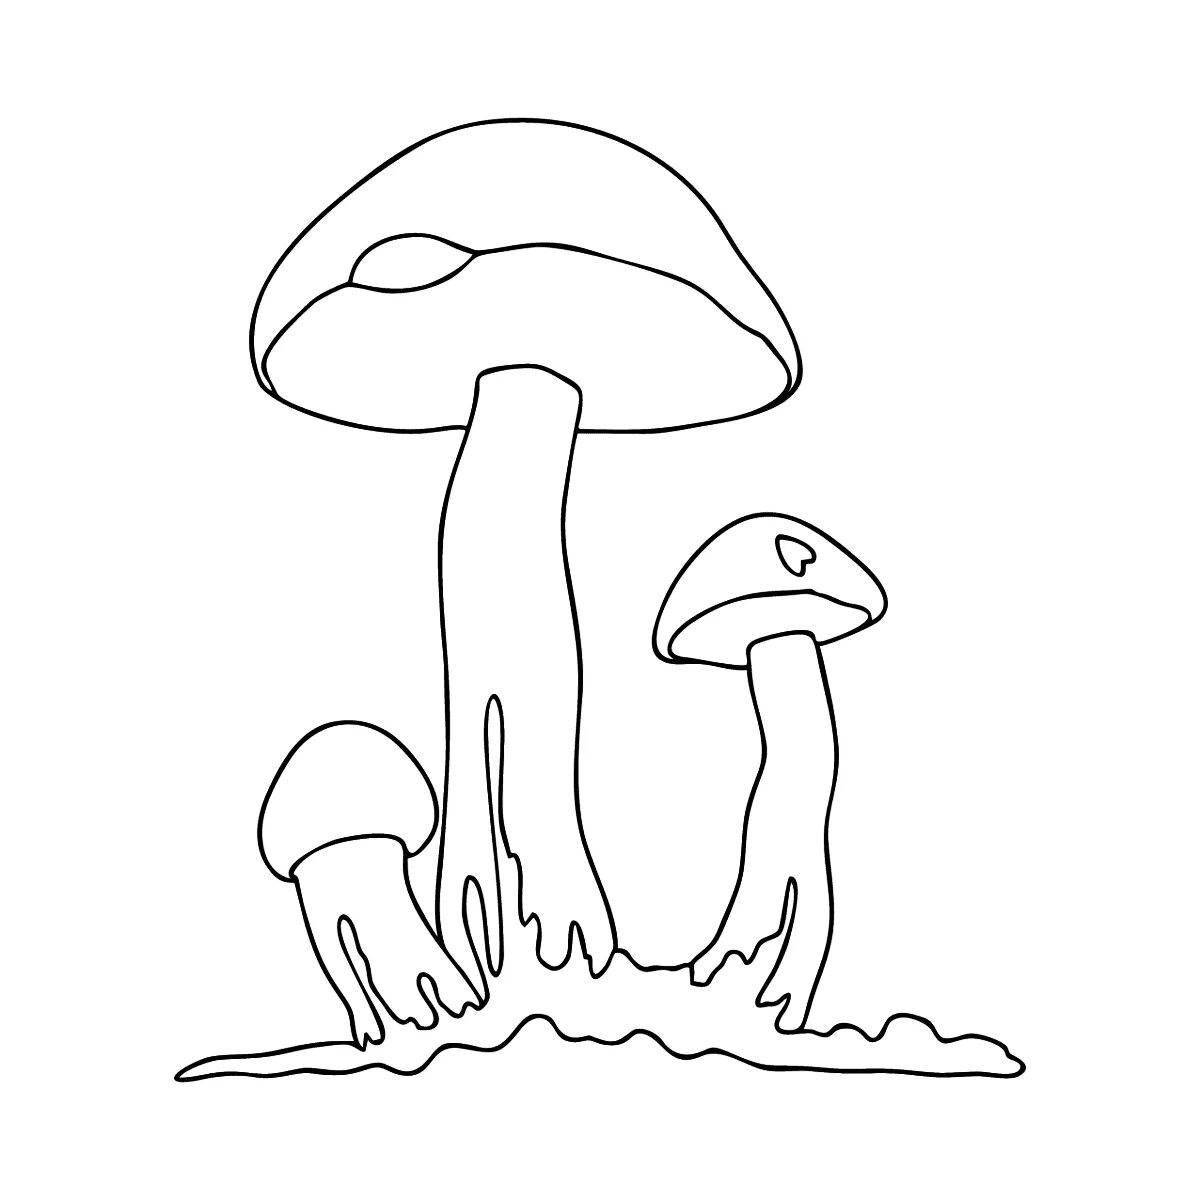 Live coloring of the boletus